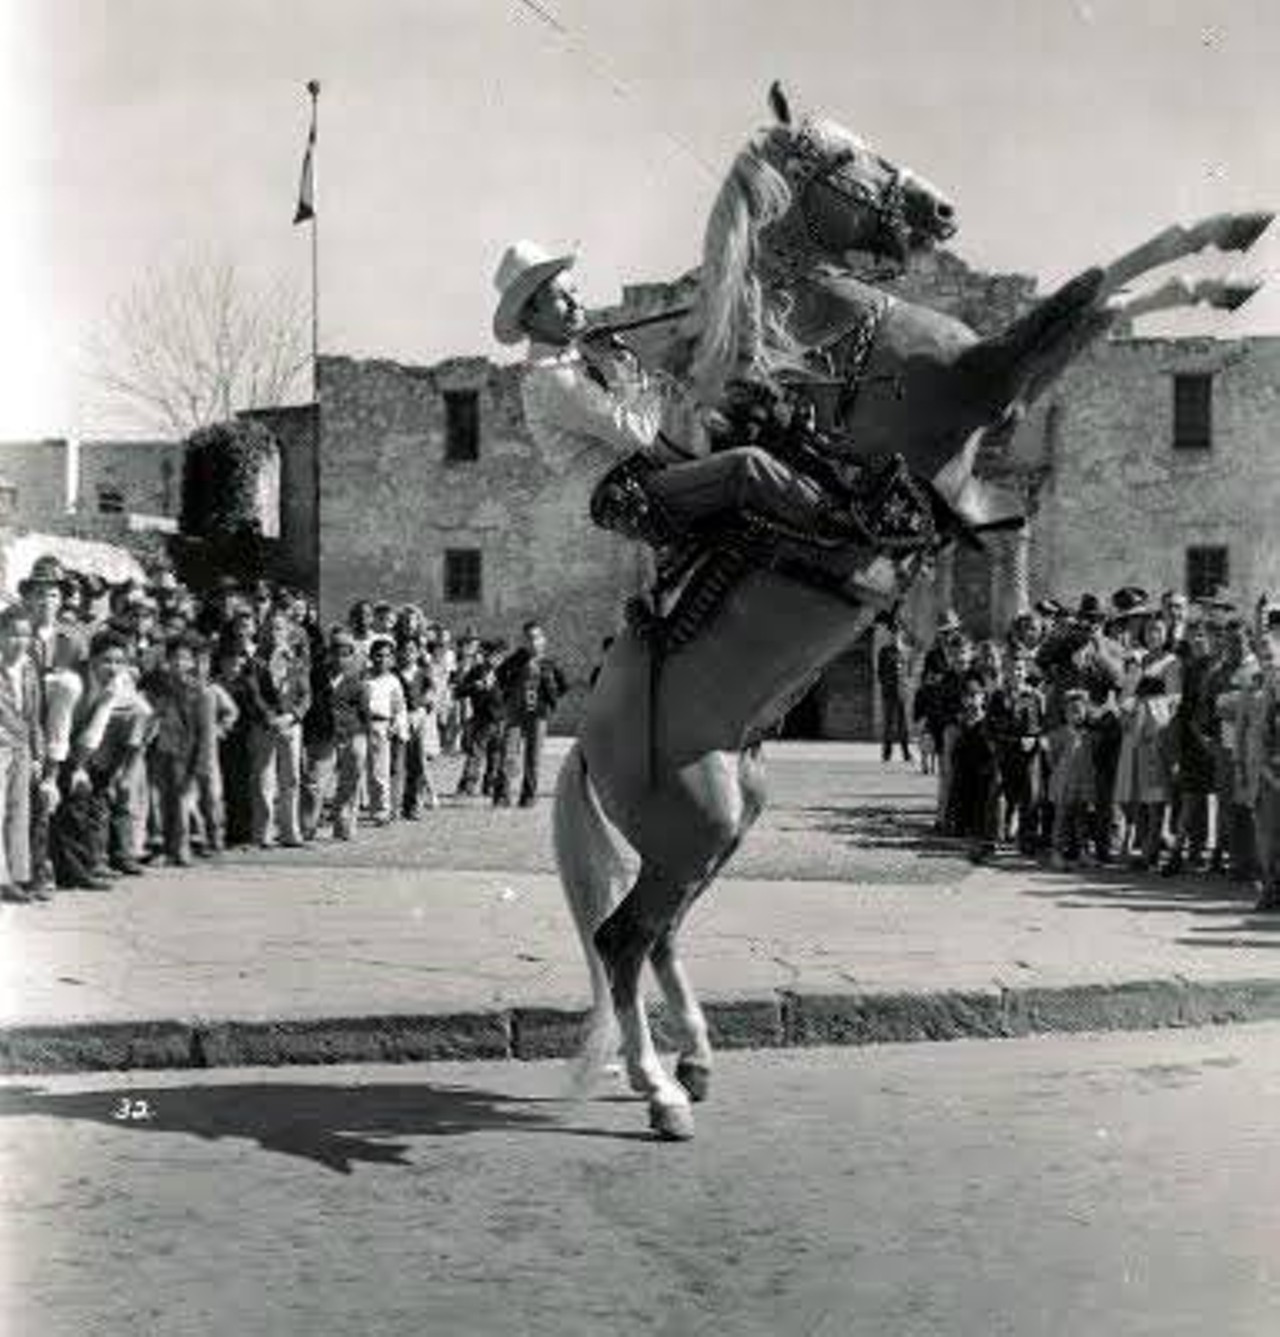 Roy and Trigger showing their classic form in front of the Alamo during a San Antonio visit to raise war bonds for WWII in 1943.